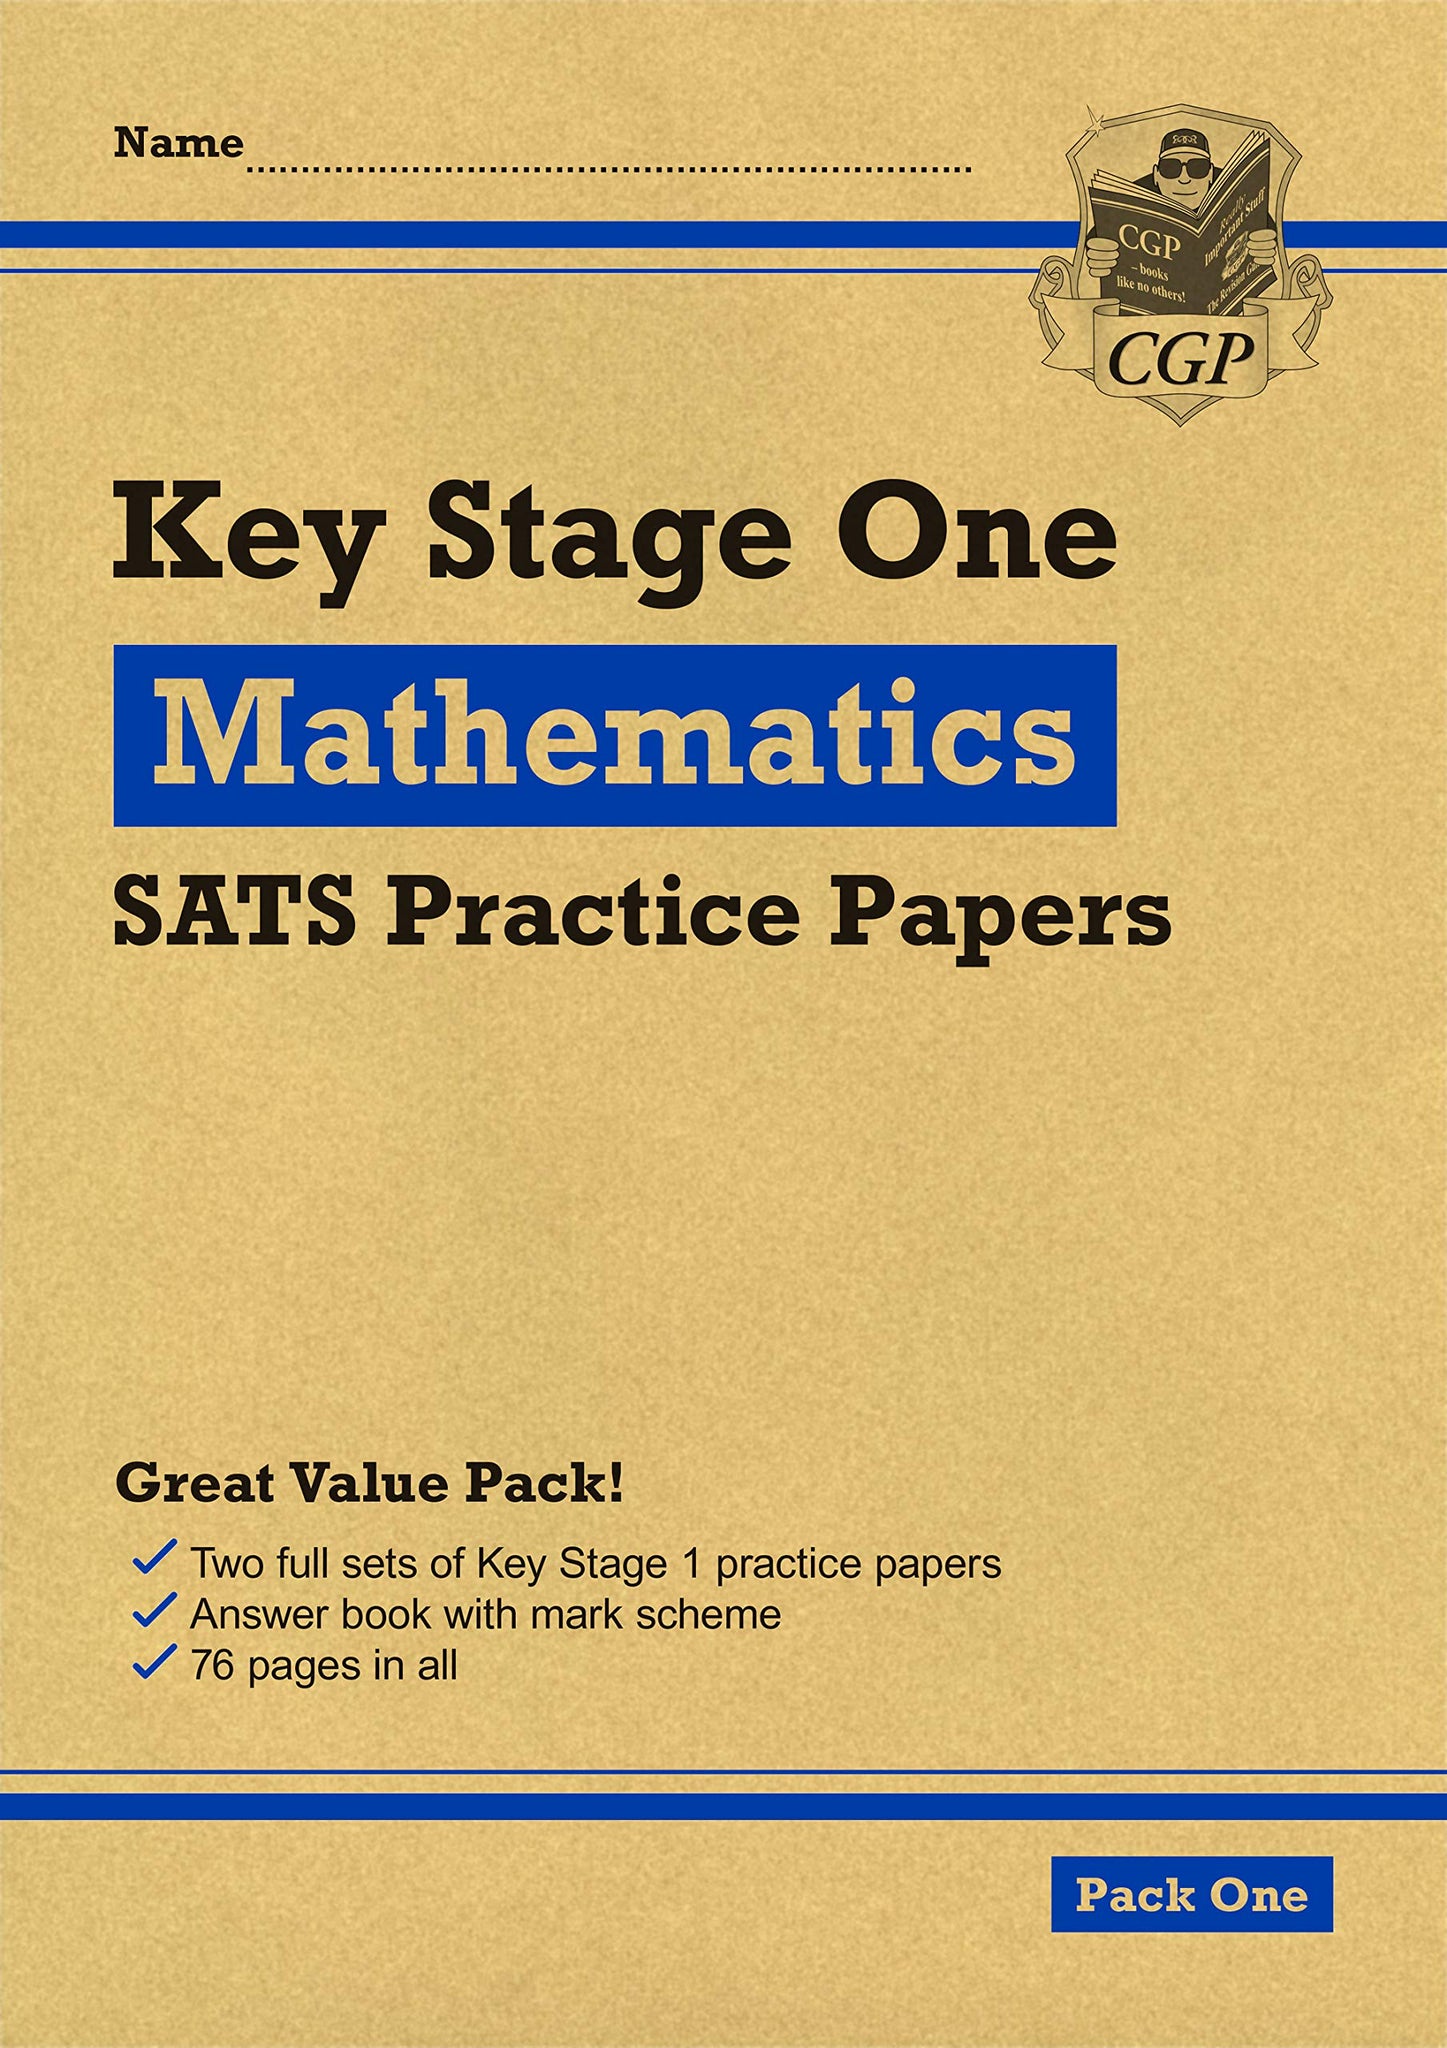 Year 2 Maths SATS Practice Paper Bundle KS1 Pack 1 & 2 for ages 6 